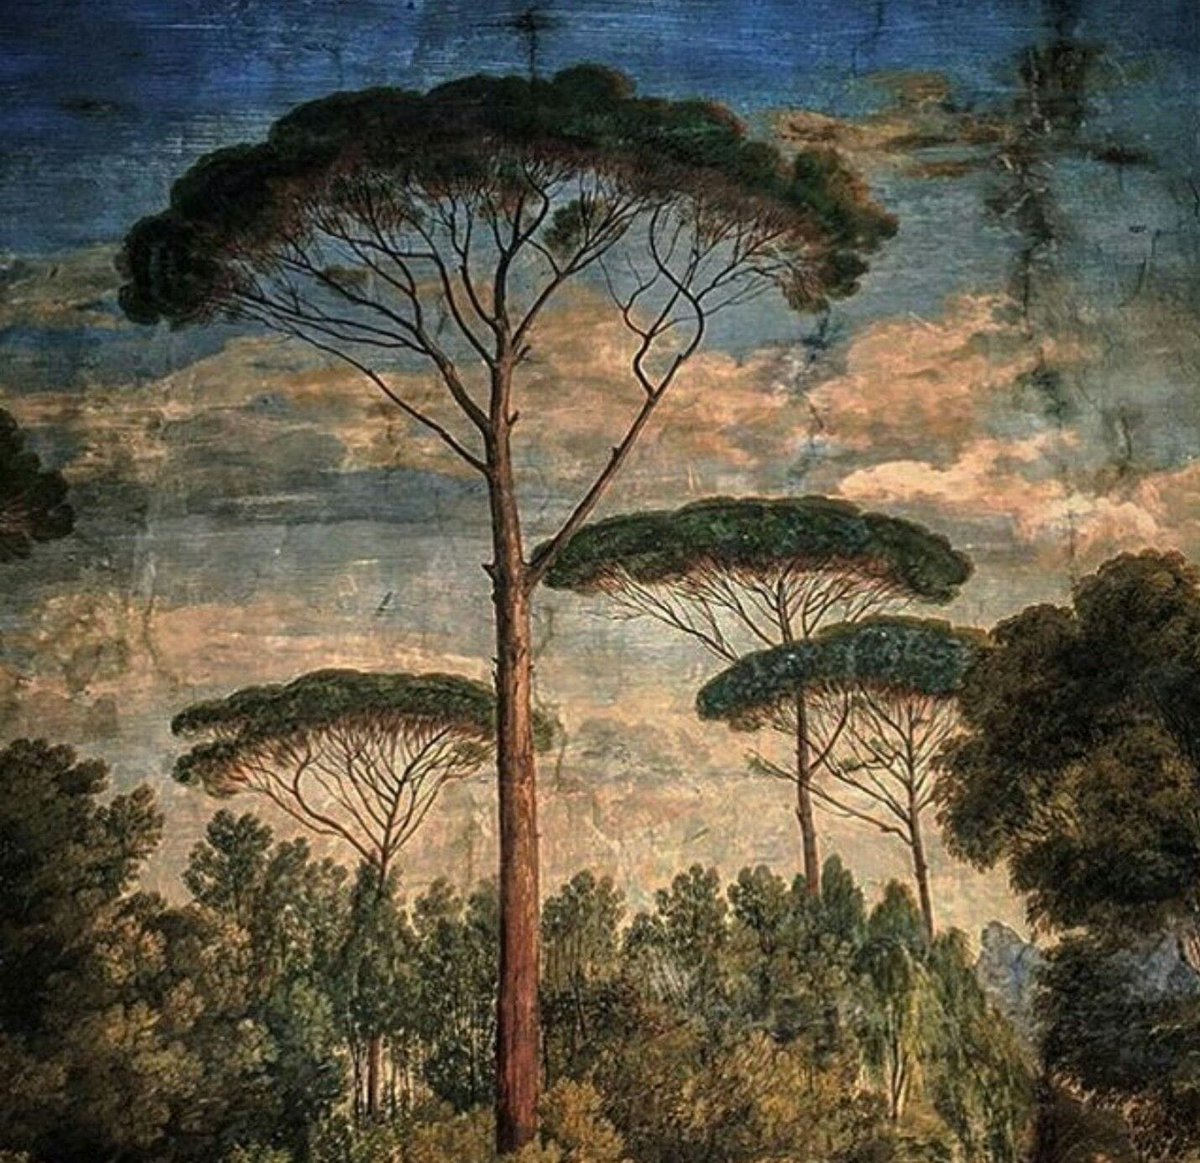 Love of Trees ~ Roman Stone Pines, Umbrella Pines, Italy, Classical Fine Art

#trees #fineart #romanstonepines #umbrellapines #italy #italianfineart #classicalfineart #lovetrees #nature #naturebeauty